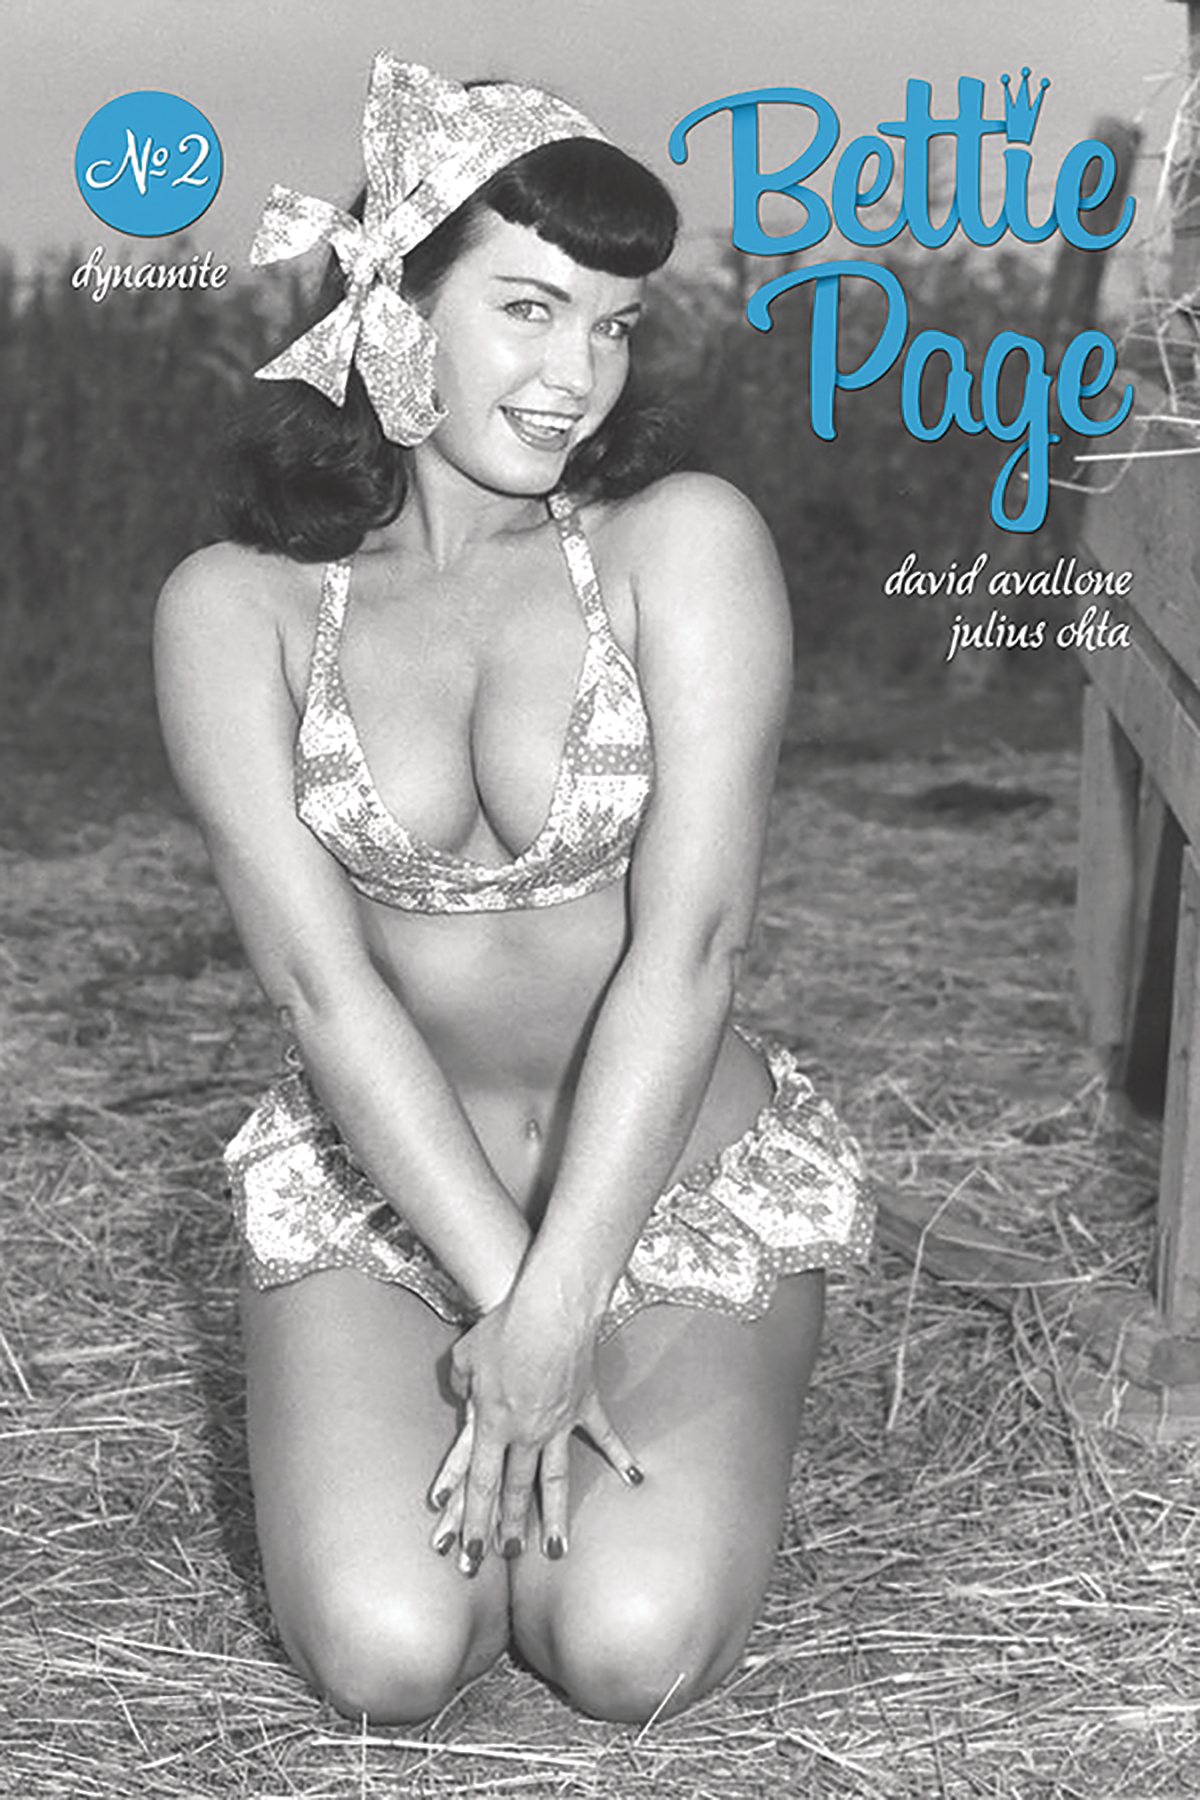 Image result for Bettie Page #2 dynamite comics